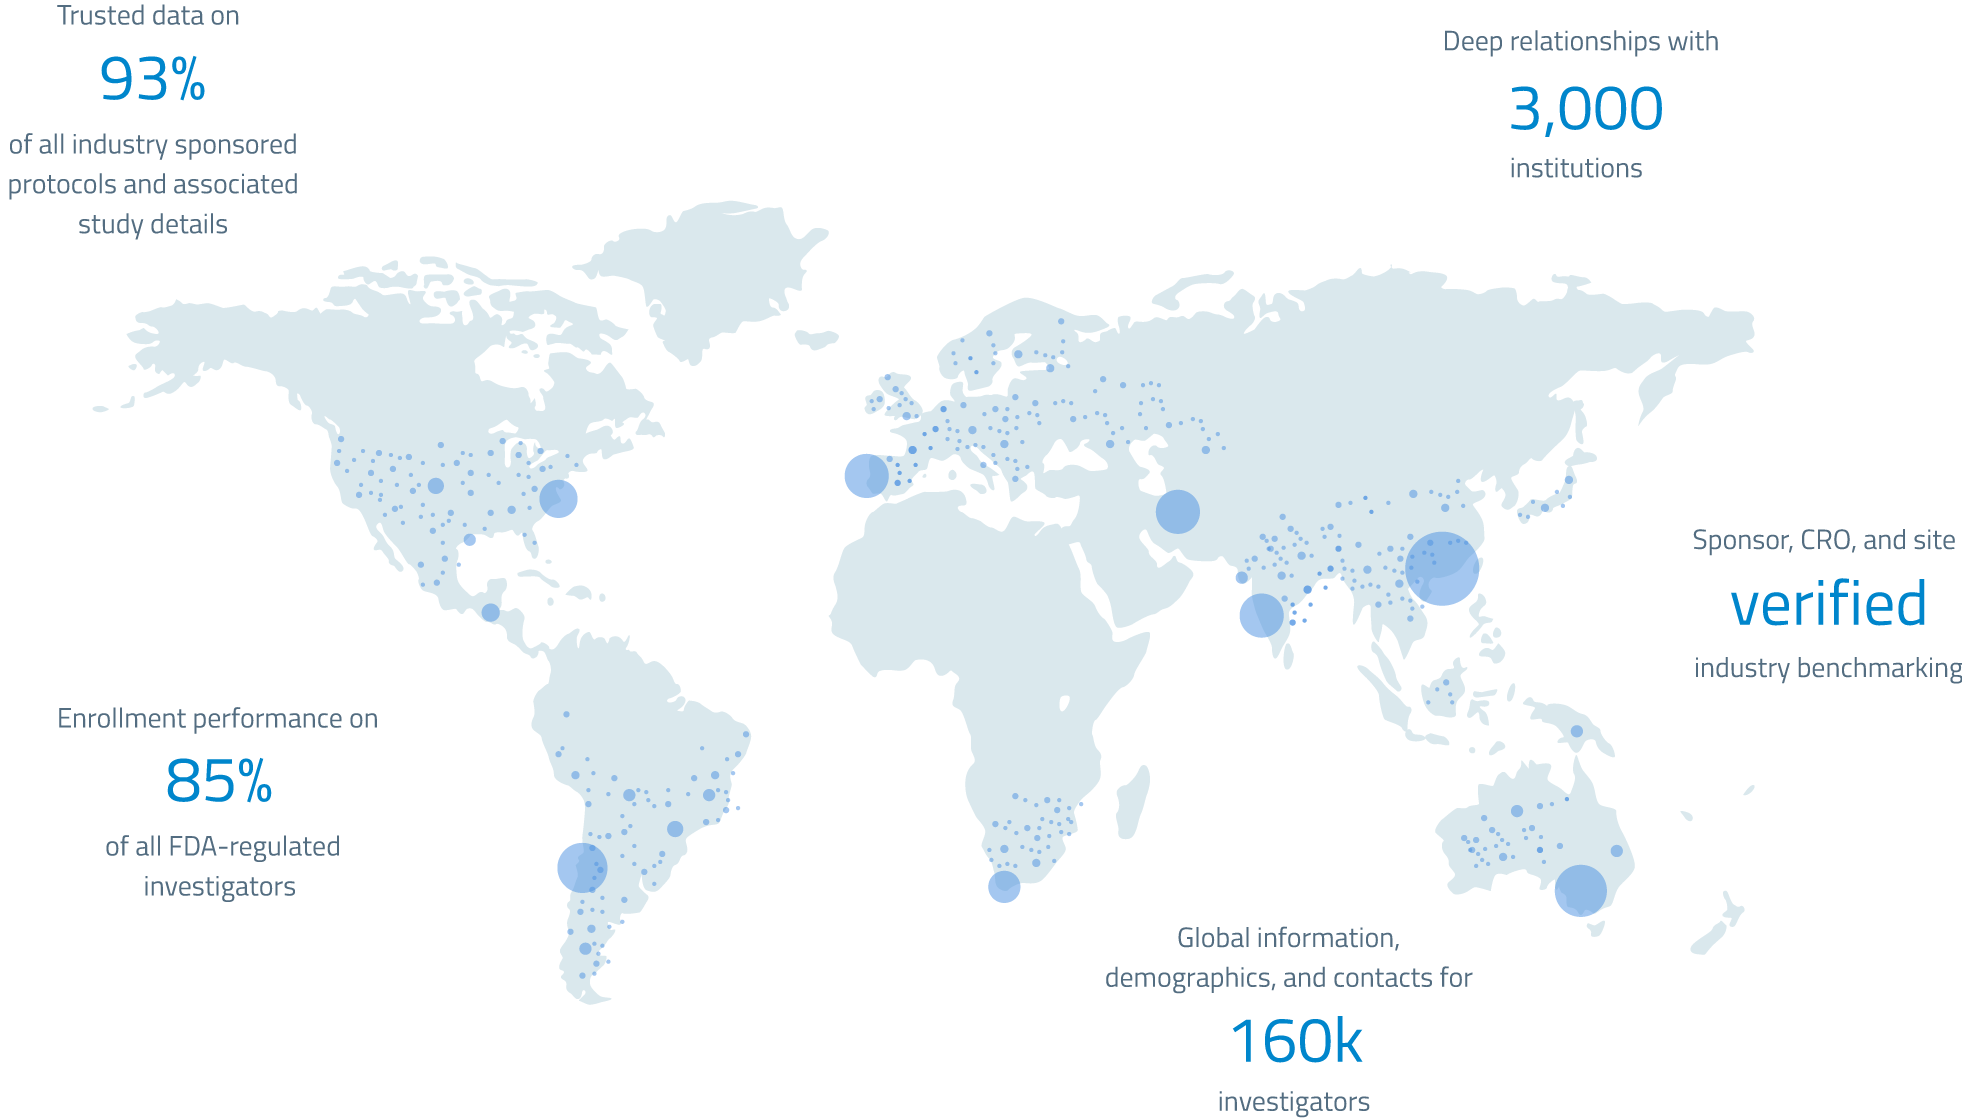 Illustration of the global data sources used in the WCG KnowledgeBase.